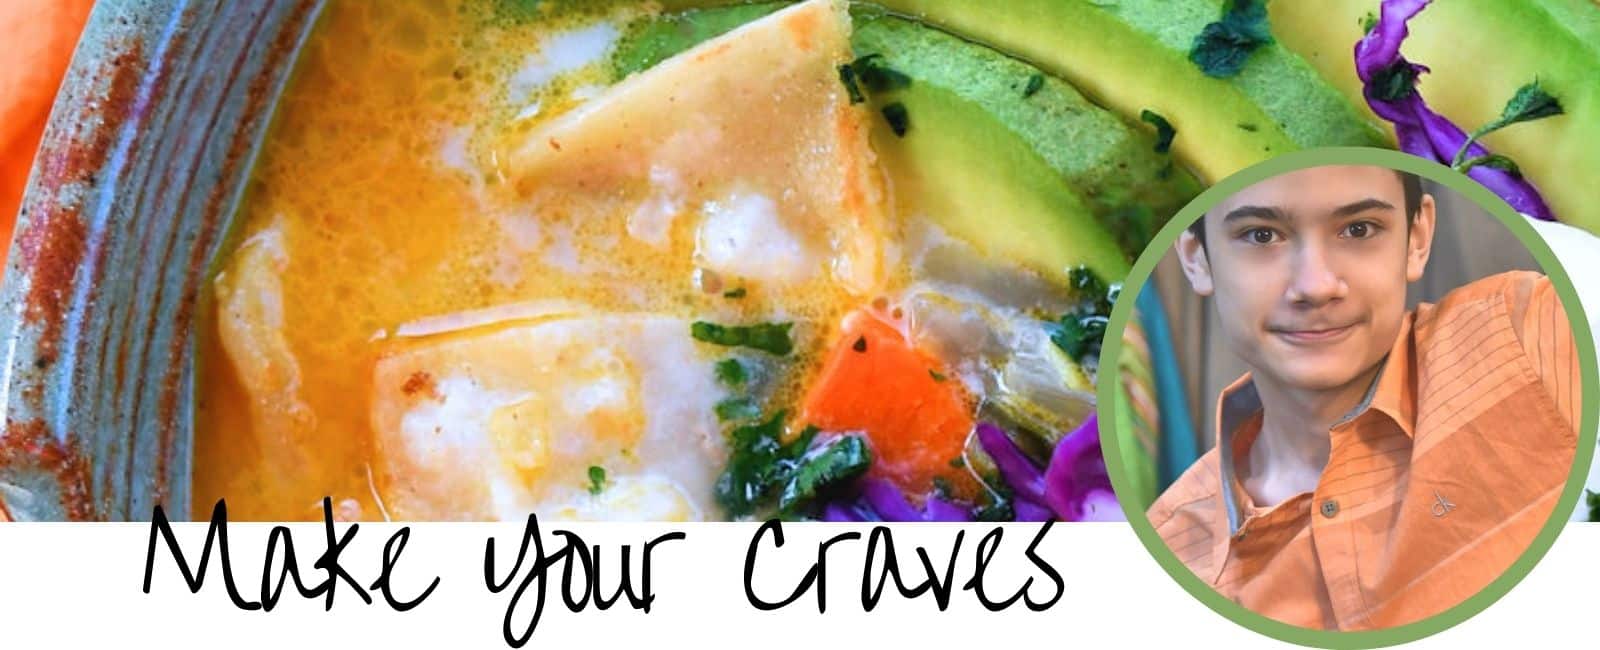 Make your craves cover image with chicken tortilla soup